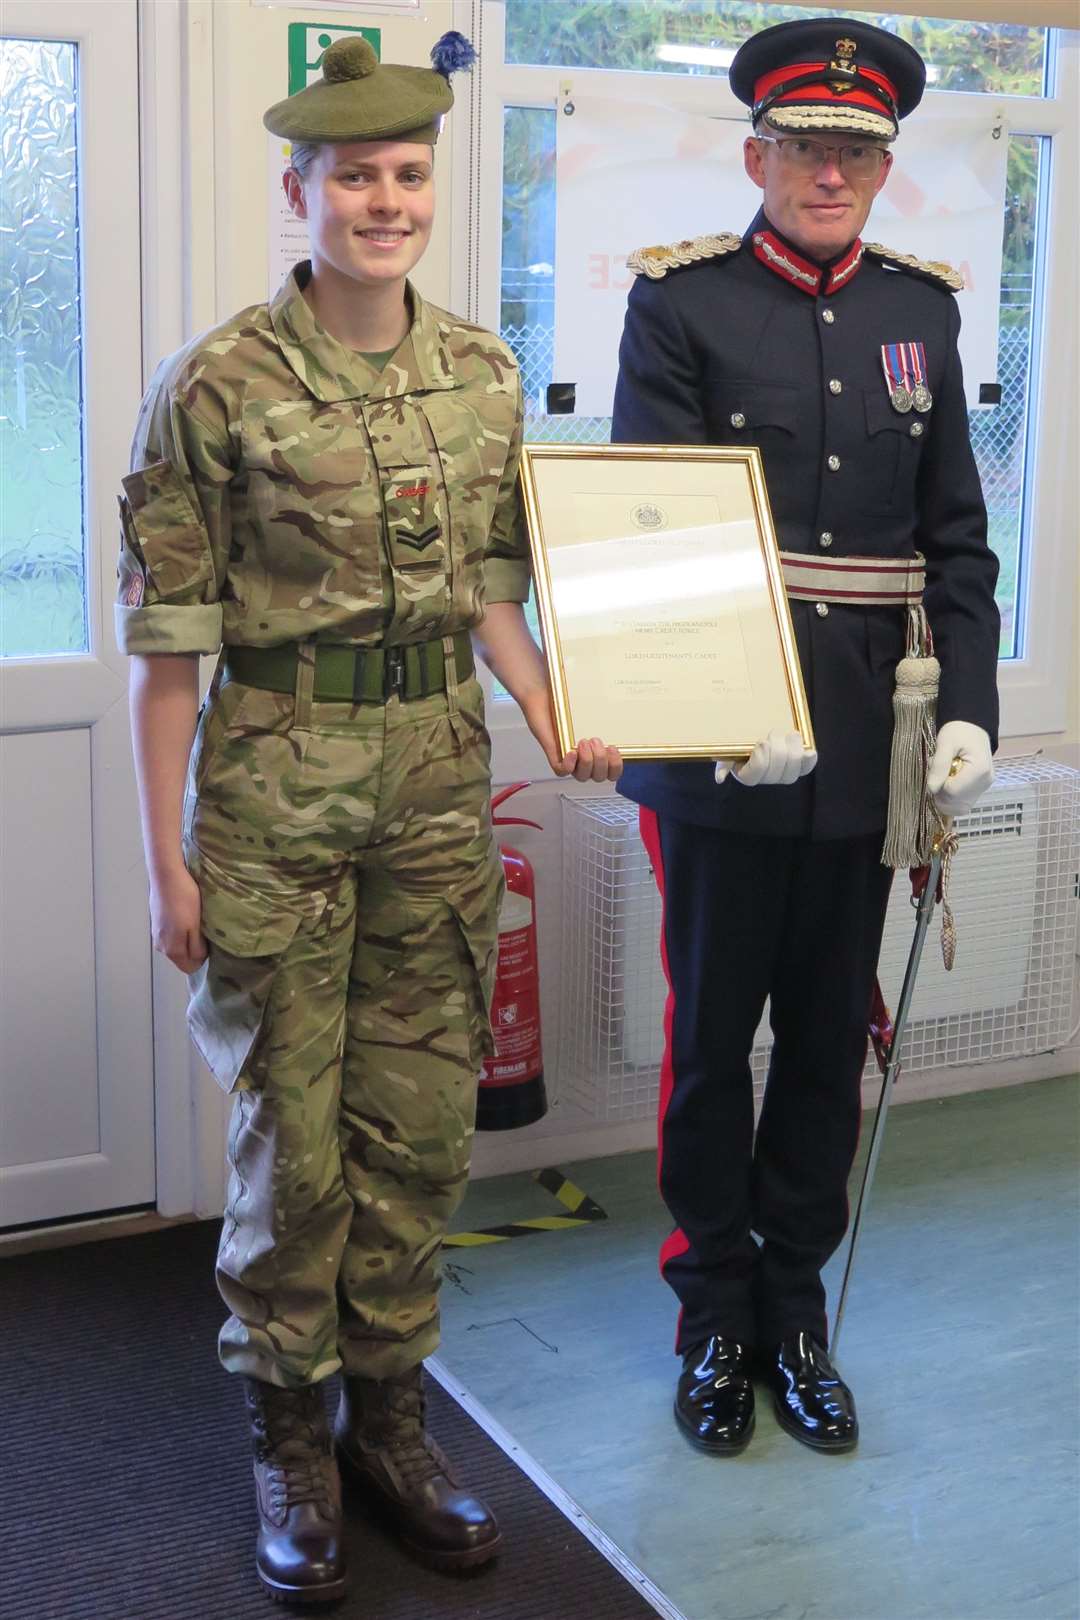 Cpl Darcey Woodman (left) receiving her certificate of appointment from the Lord Lieutenant of Nairnshire.